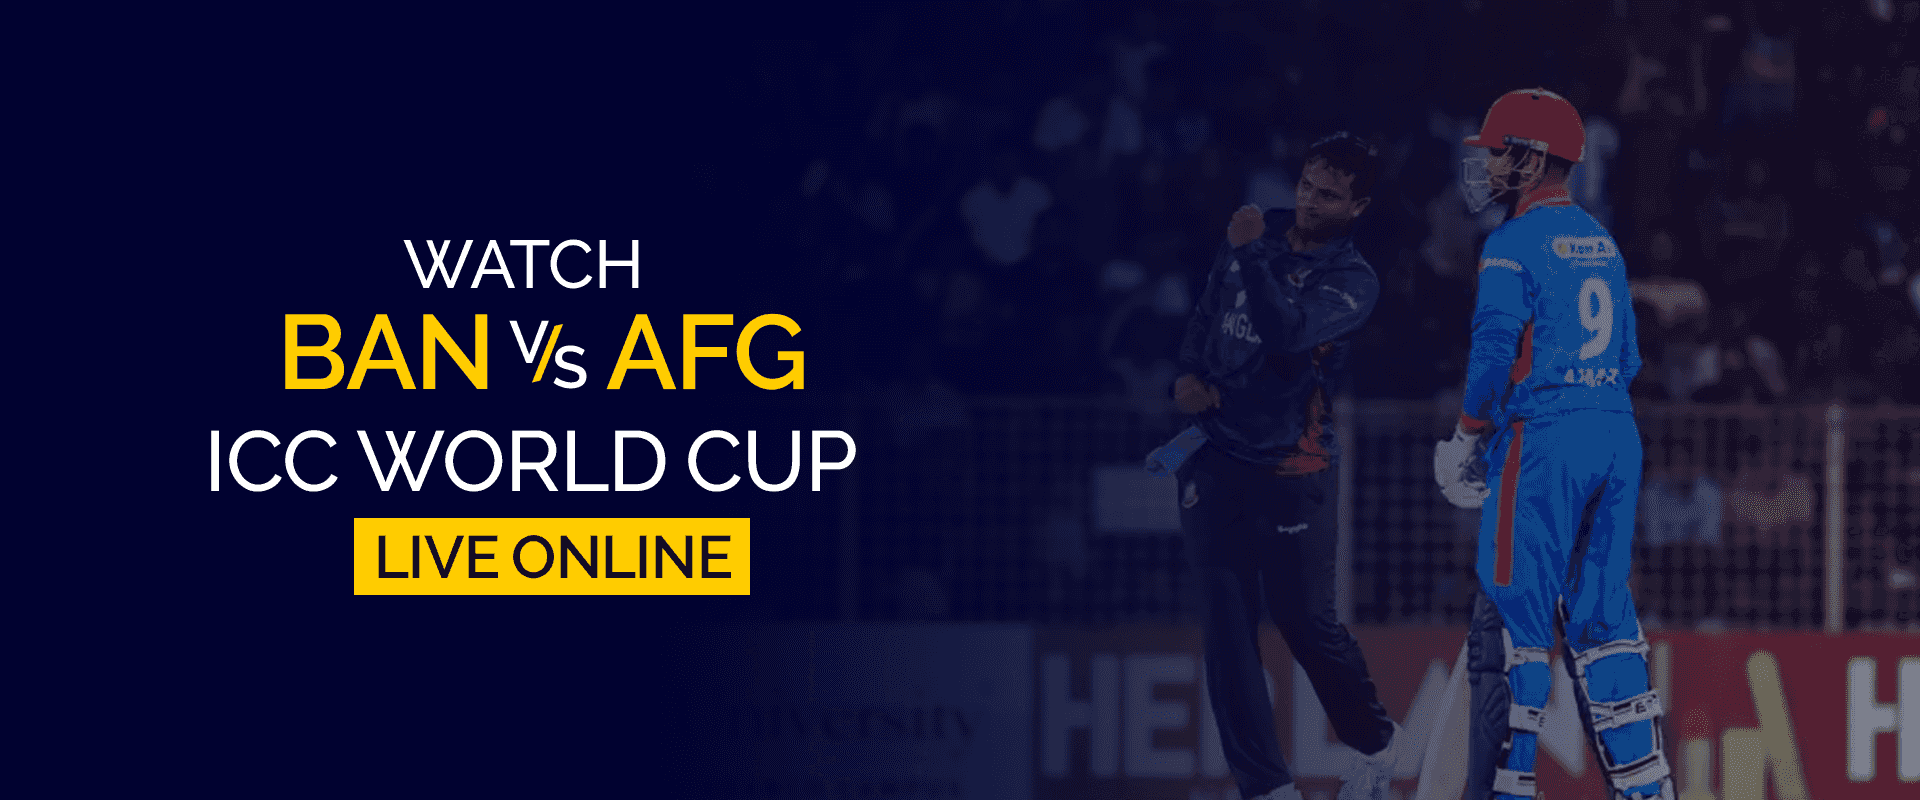 Watch BAN vs AFG ICC World Cup Live Online